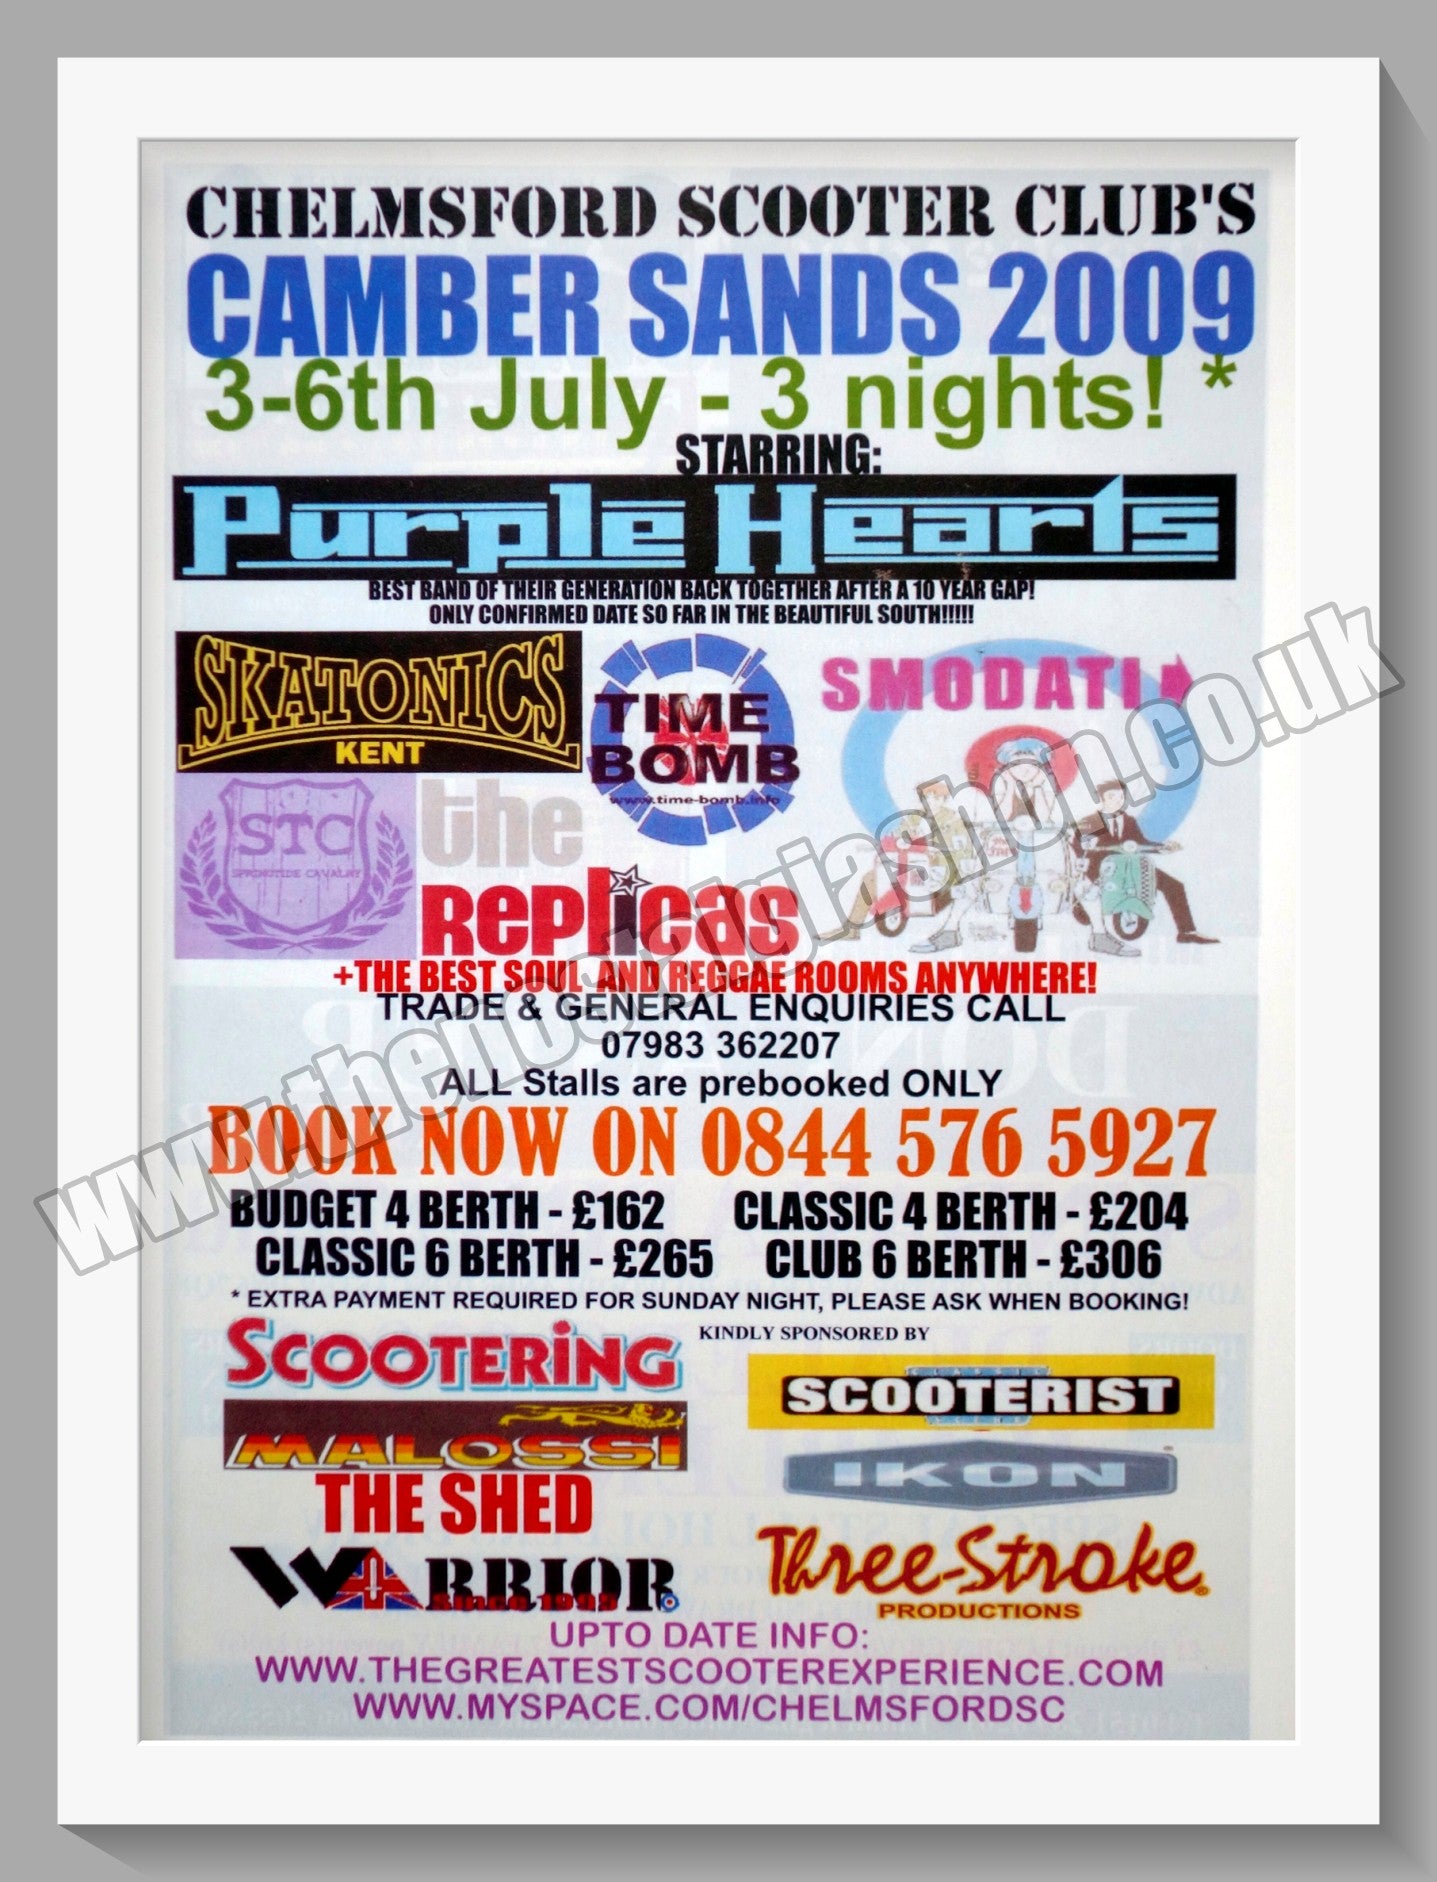 Camber Sands Scooter Rally 2009. Original Advert (ref AD60170)